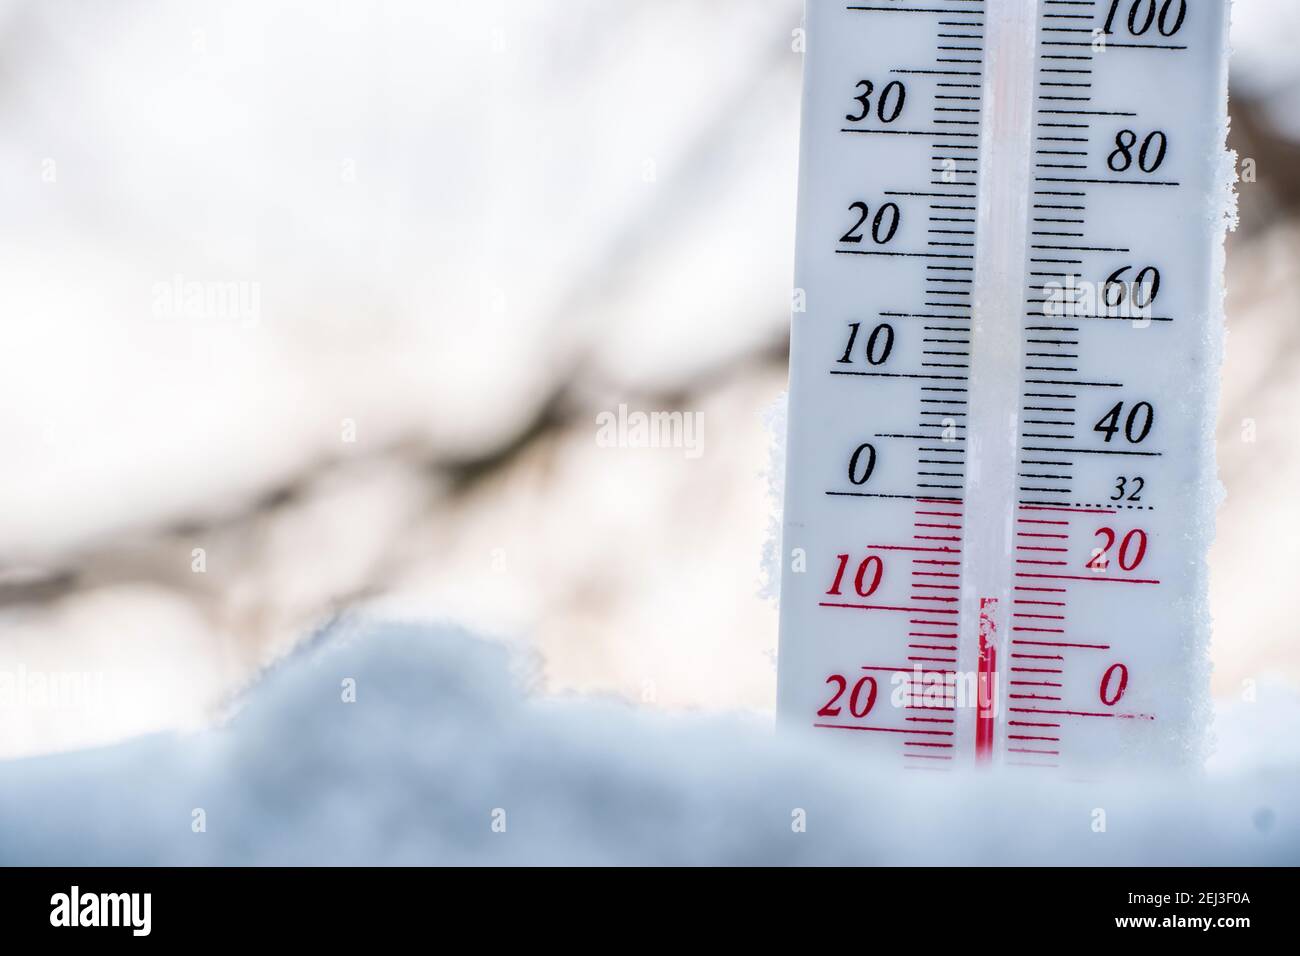 The Thermometer Lies On The Snow In Winter Showing A Negative Temperature  Meteorological Conditions In A Harsh Climate In Winter With Low Air And  Ambient Temperaturesfreeze In Wintertime Stock Photo - Download